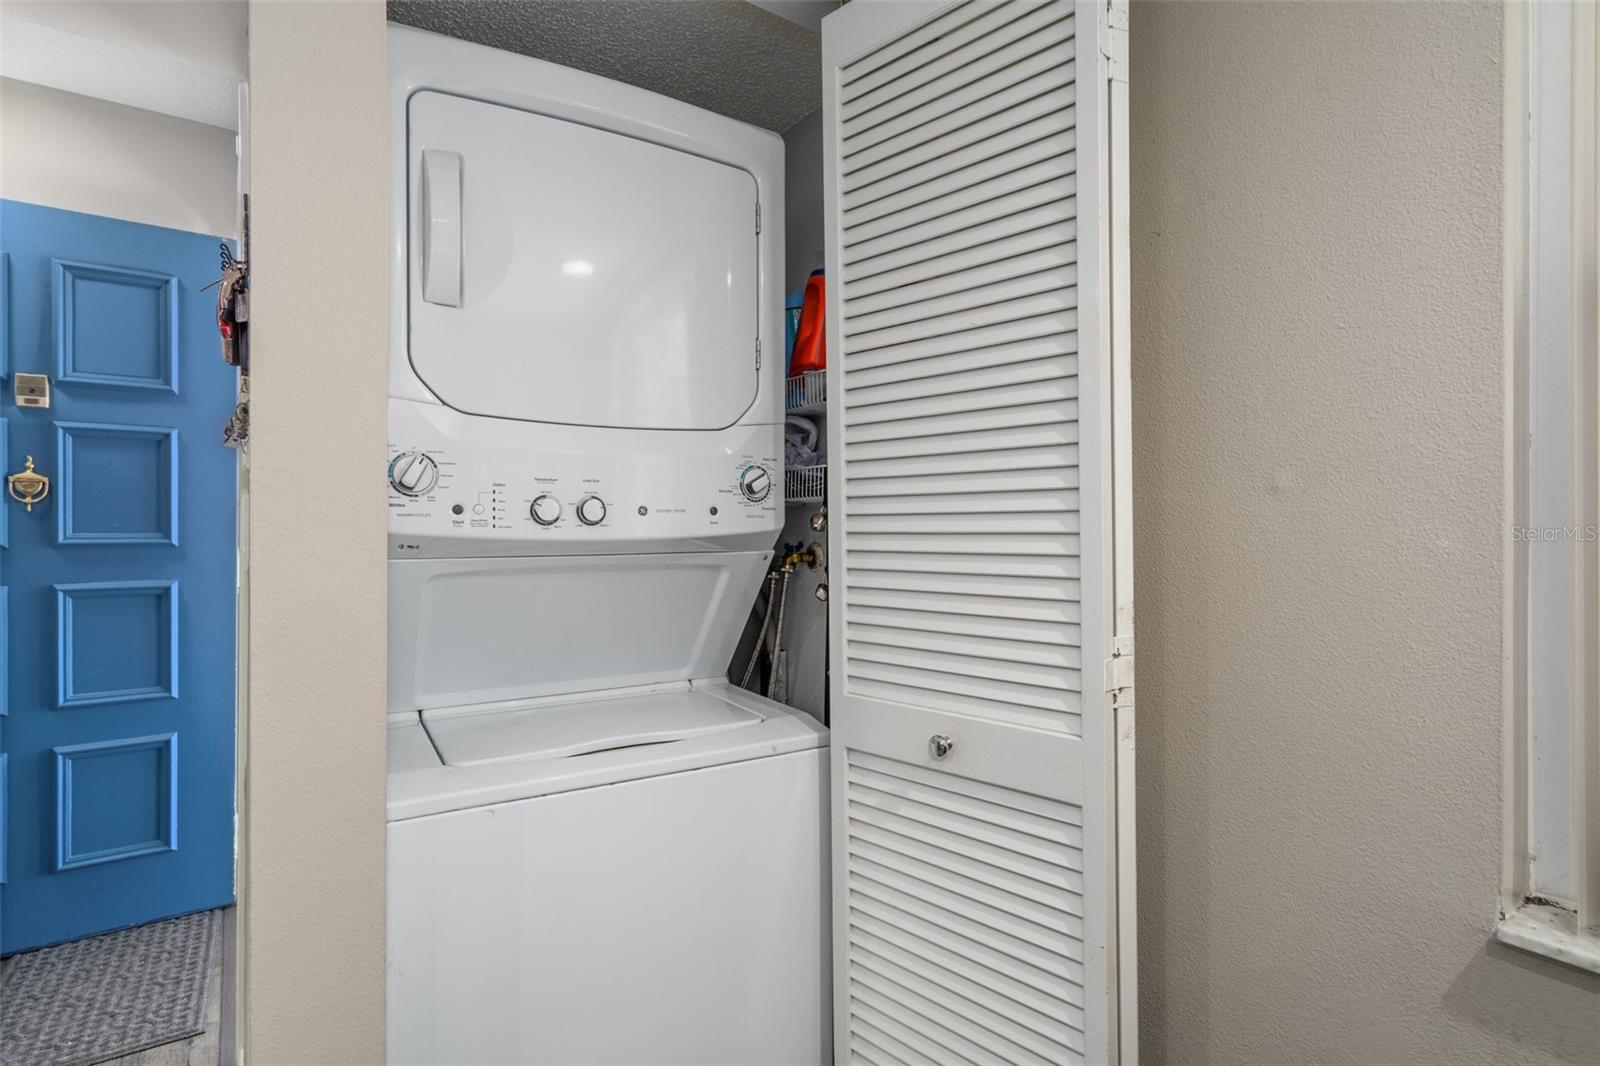 Full size washer/dryer bought in 2020